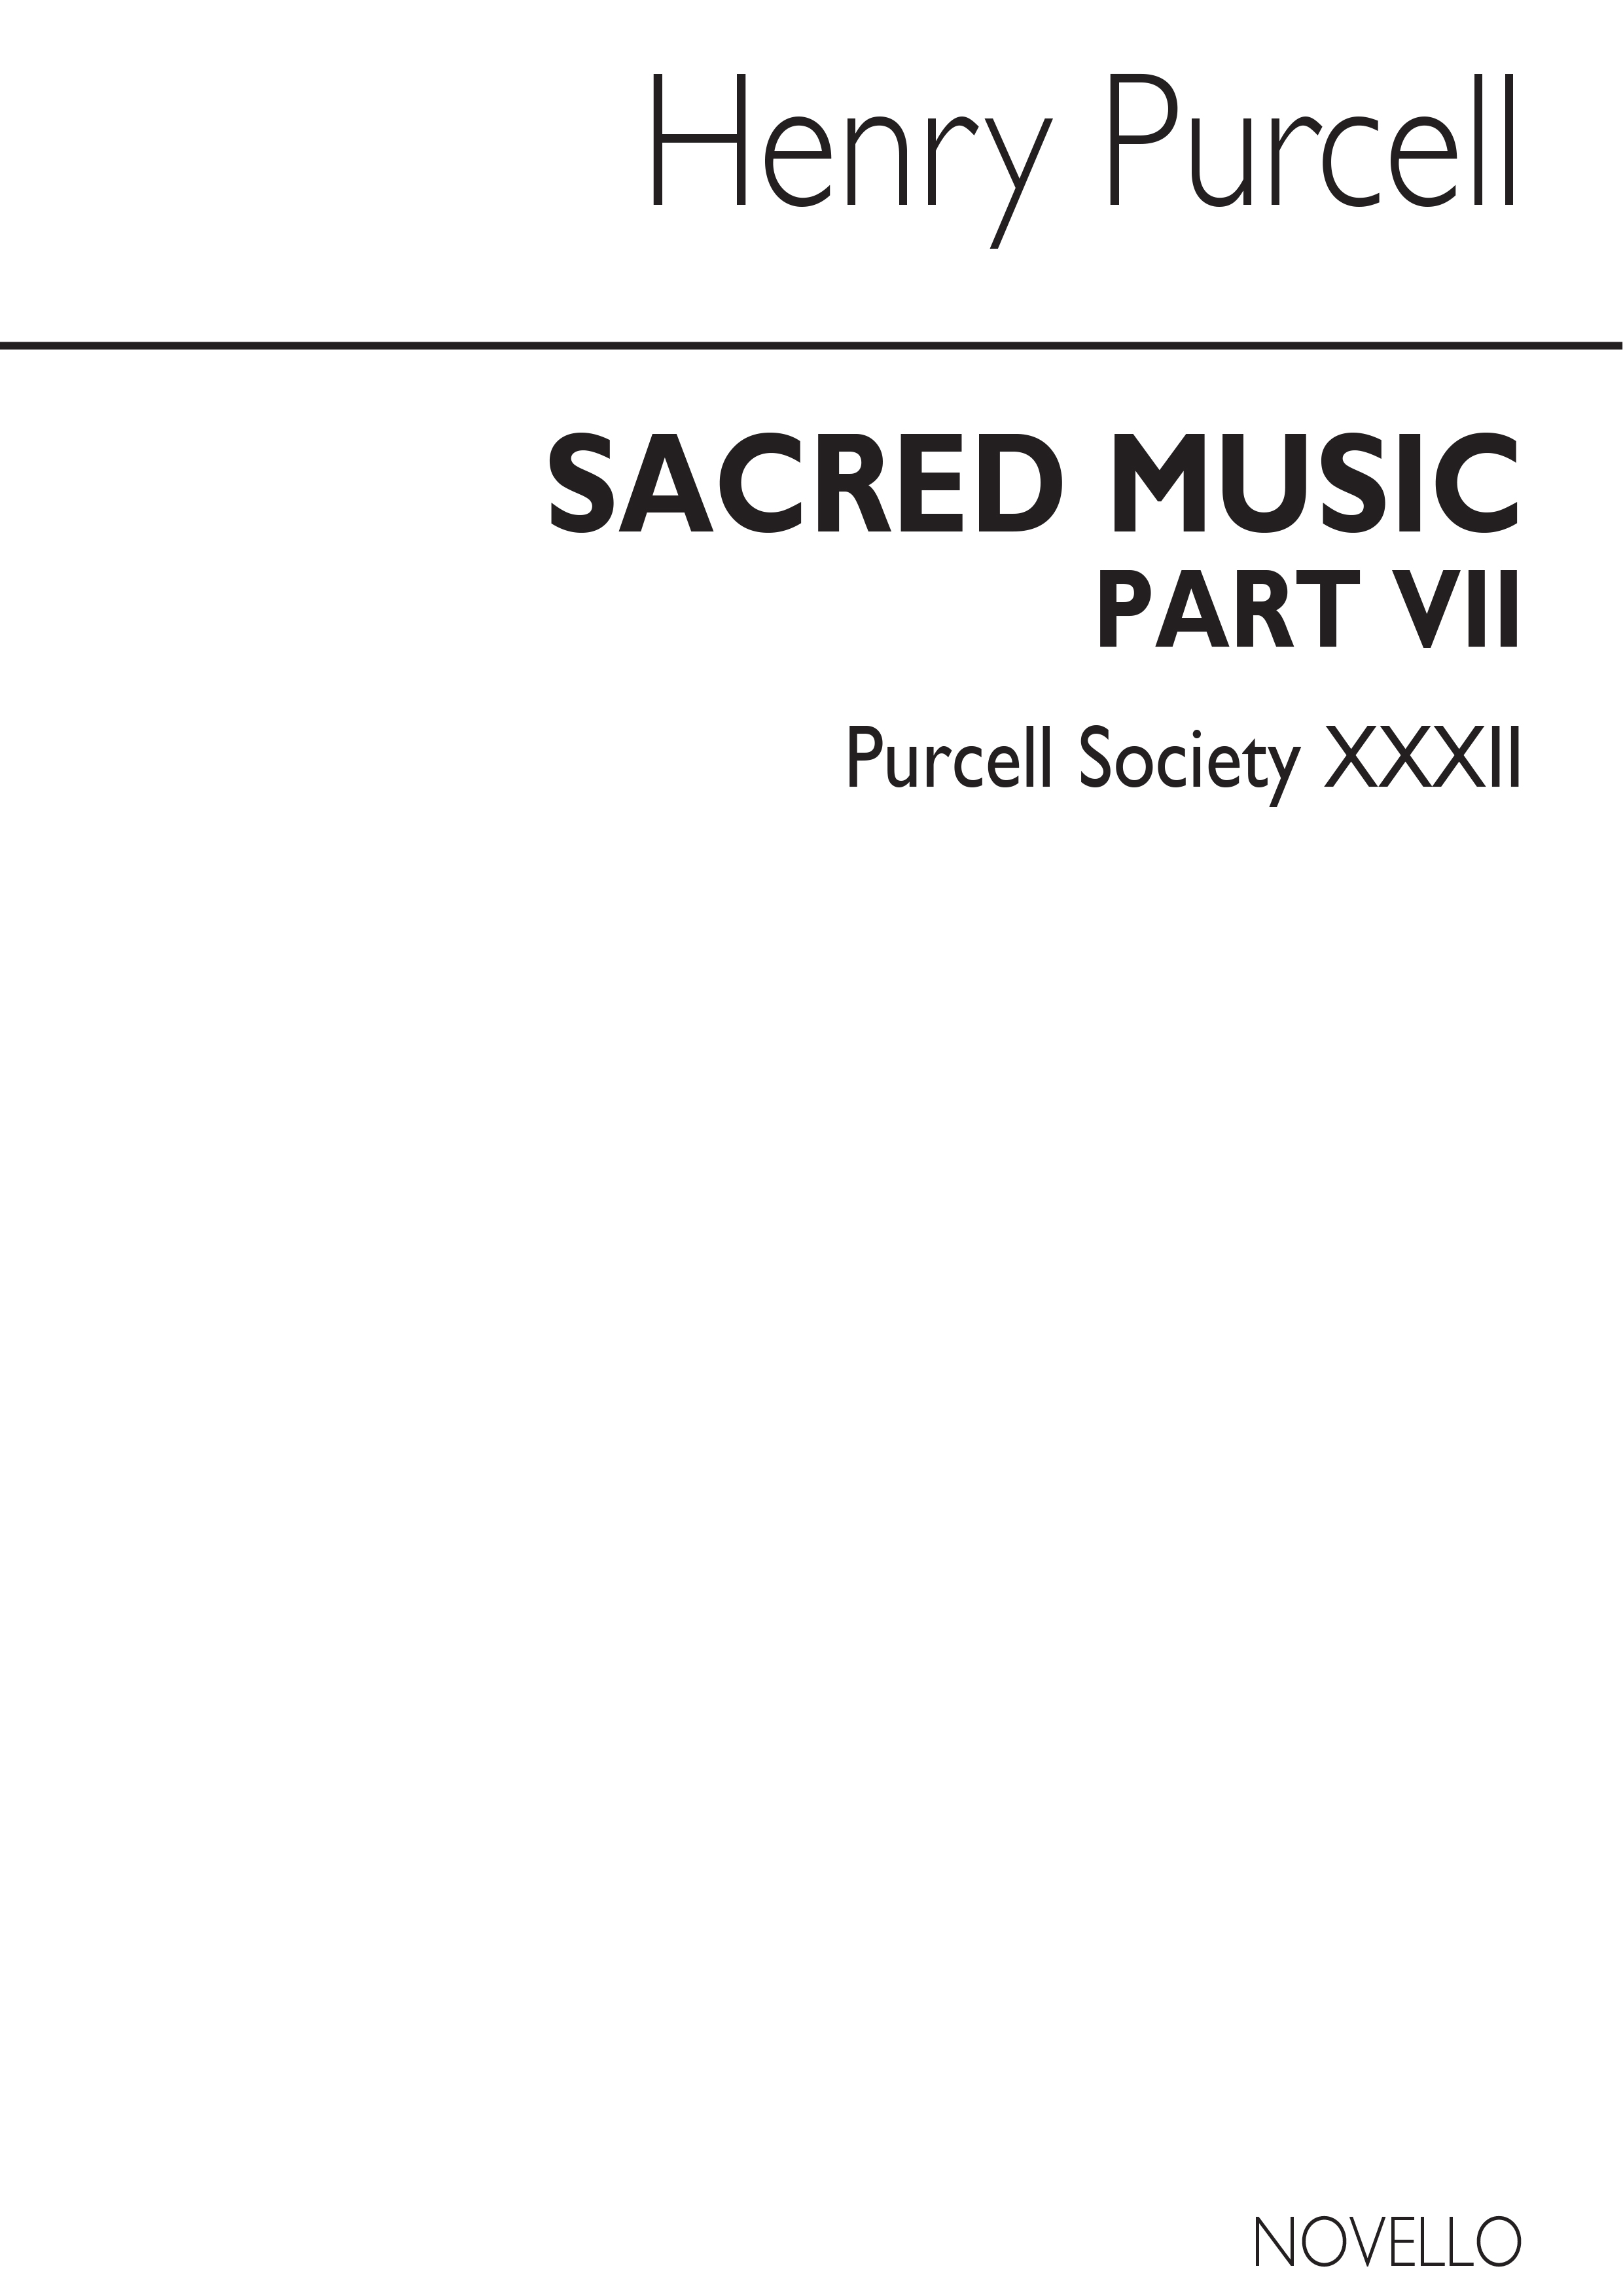 Purcell Society Volume 32 - Sacred Music Part 7 (Original Engraving)